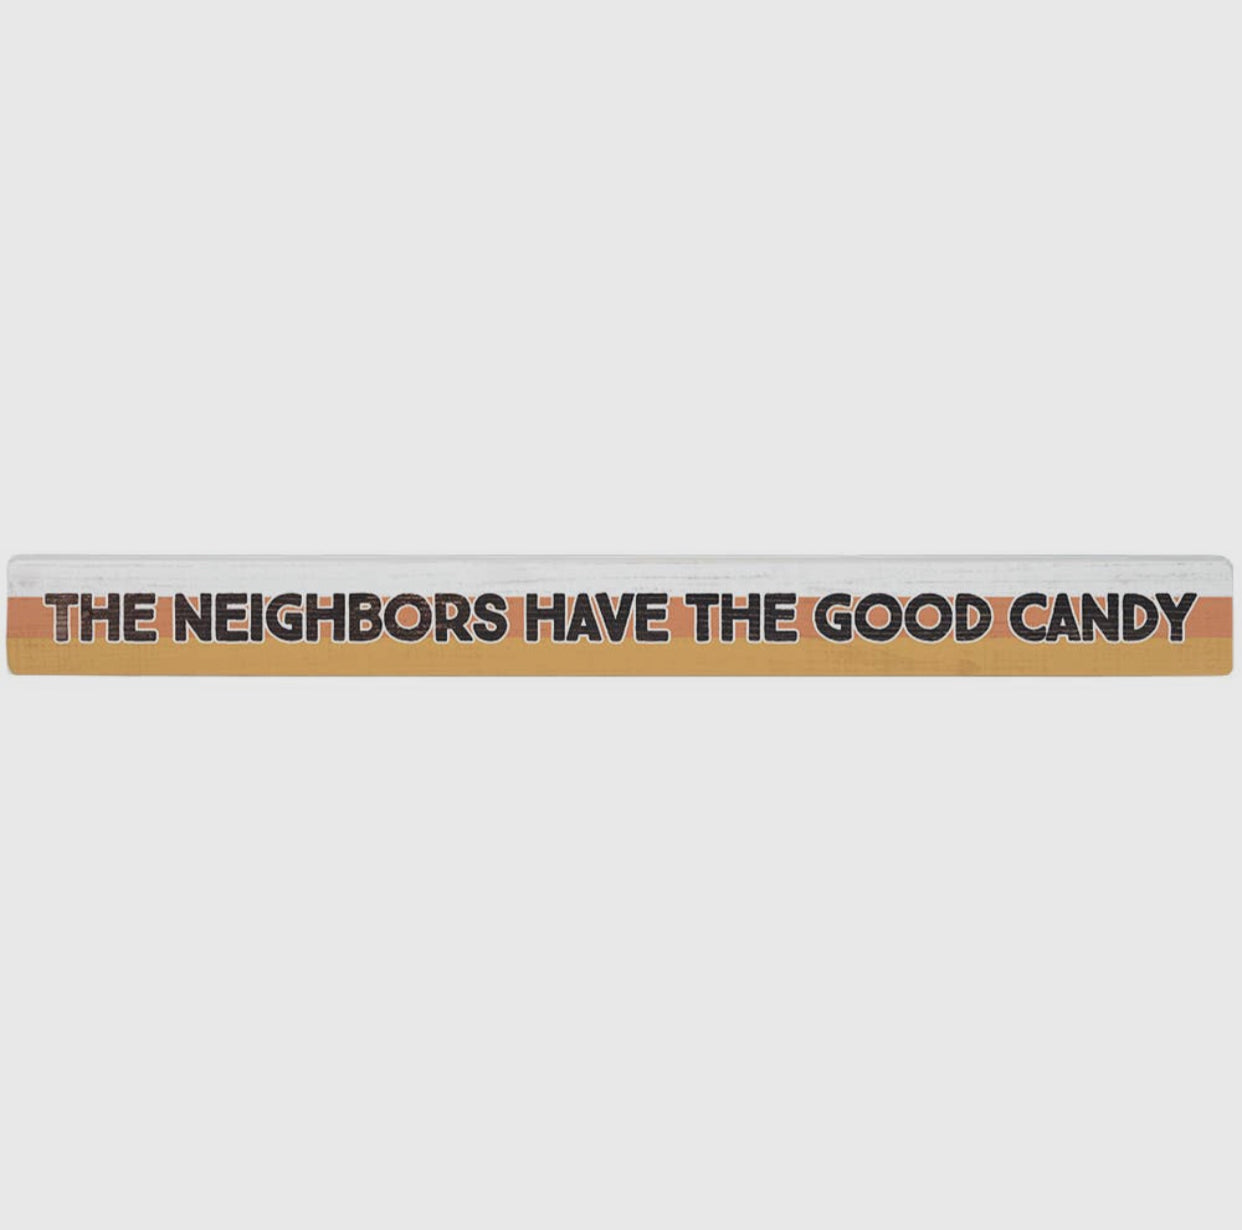 Sincere Surroundings "The Neighbors Have The Good Candy"